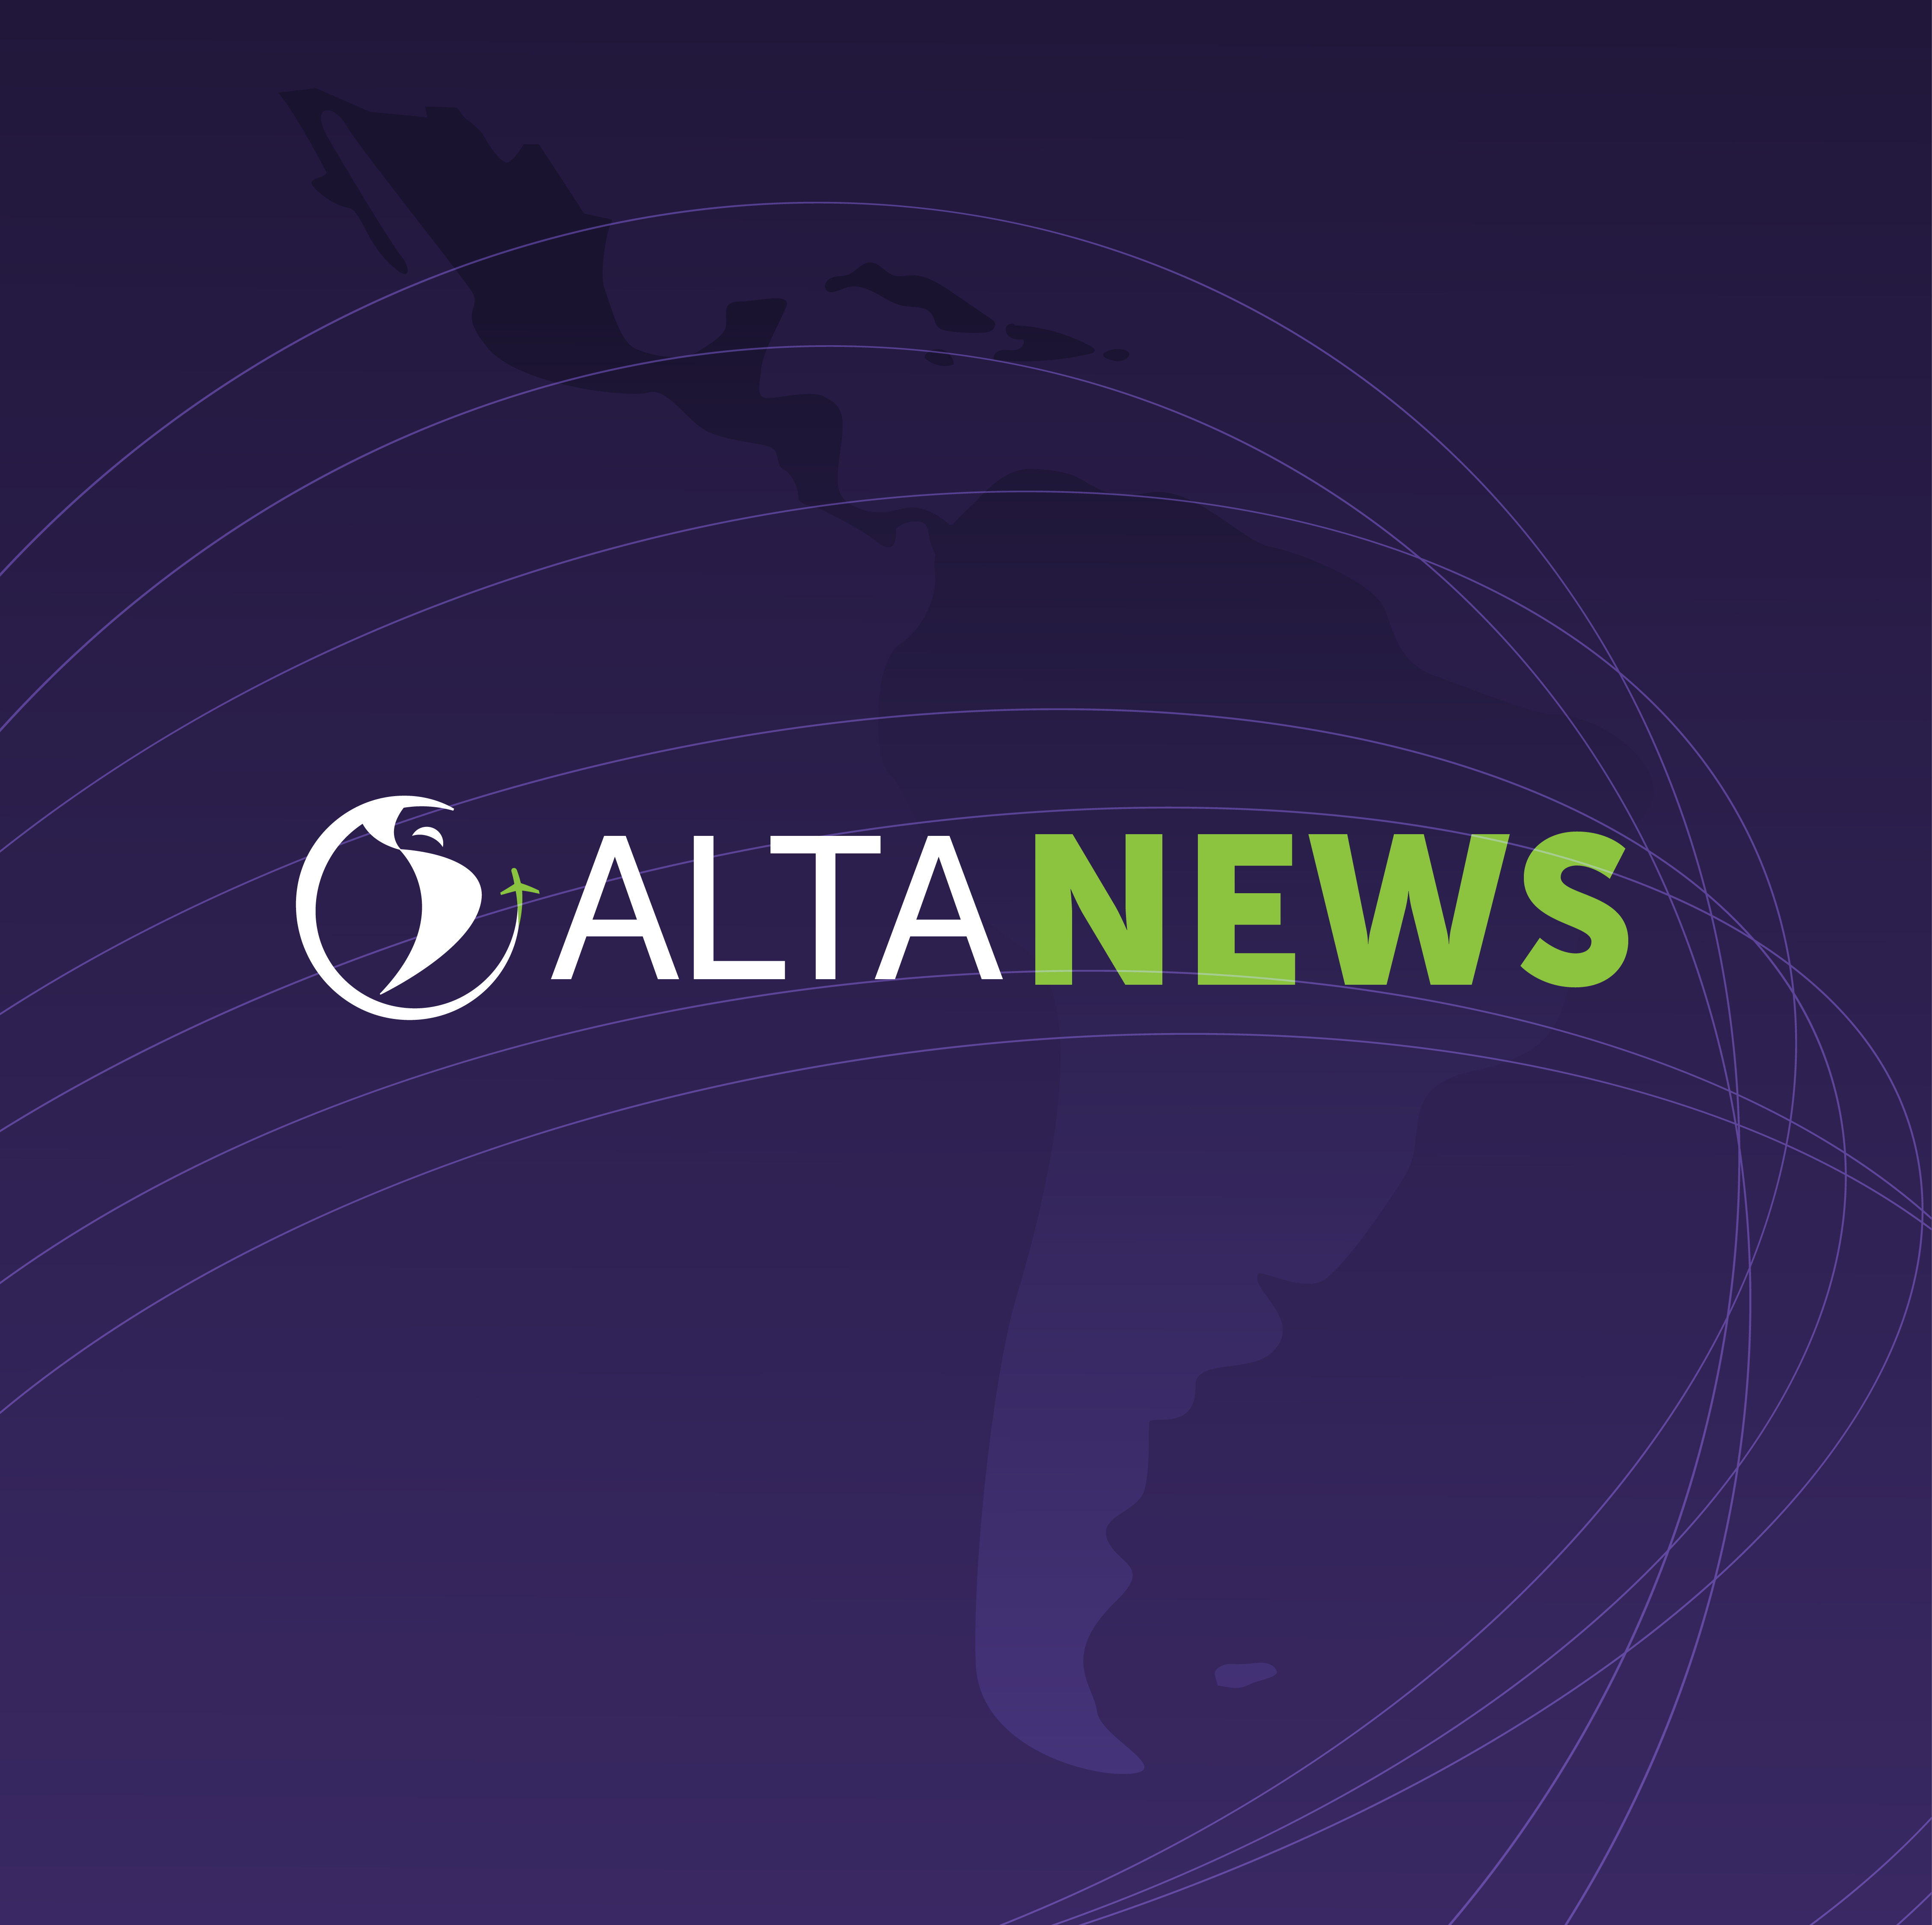 ALTA NEWS - Travel and tourism strengthen as an engine of socioeconomic growth in Latin America and the Caribbean